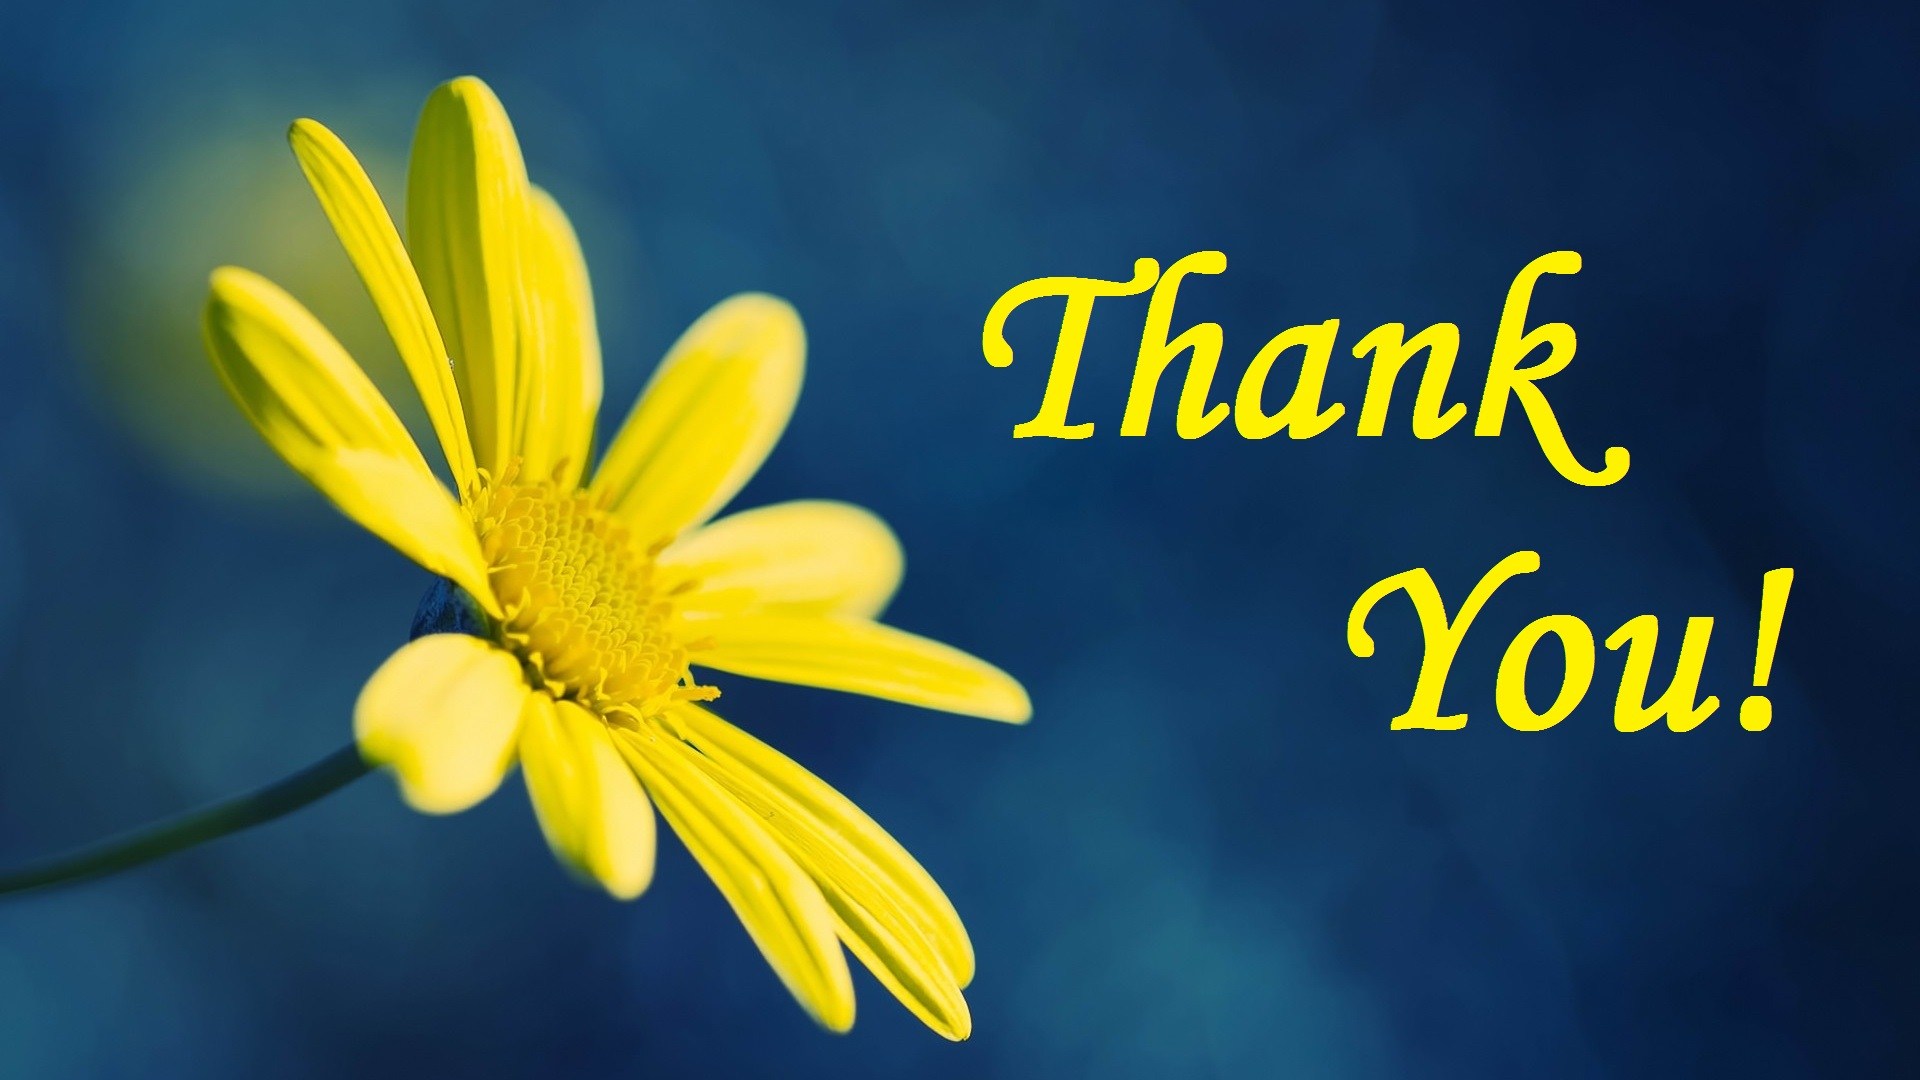 Thank You Wallpaper HD Posted By Sarah Tremblay